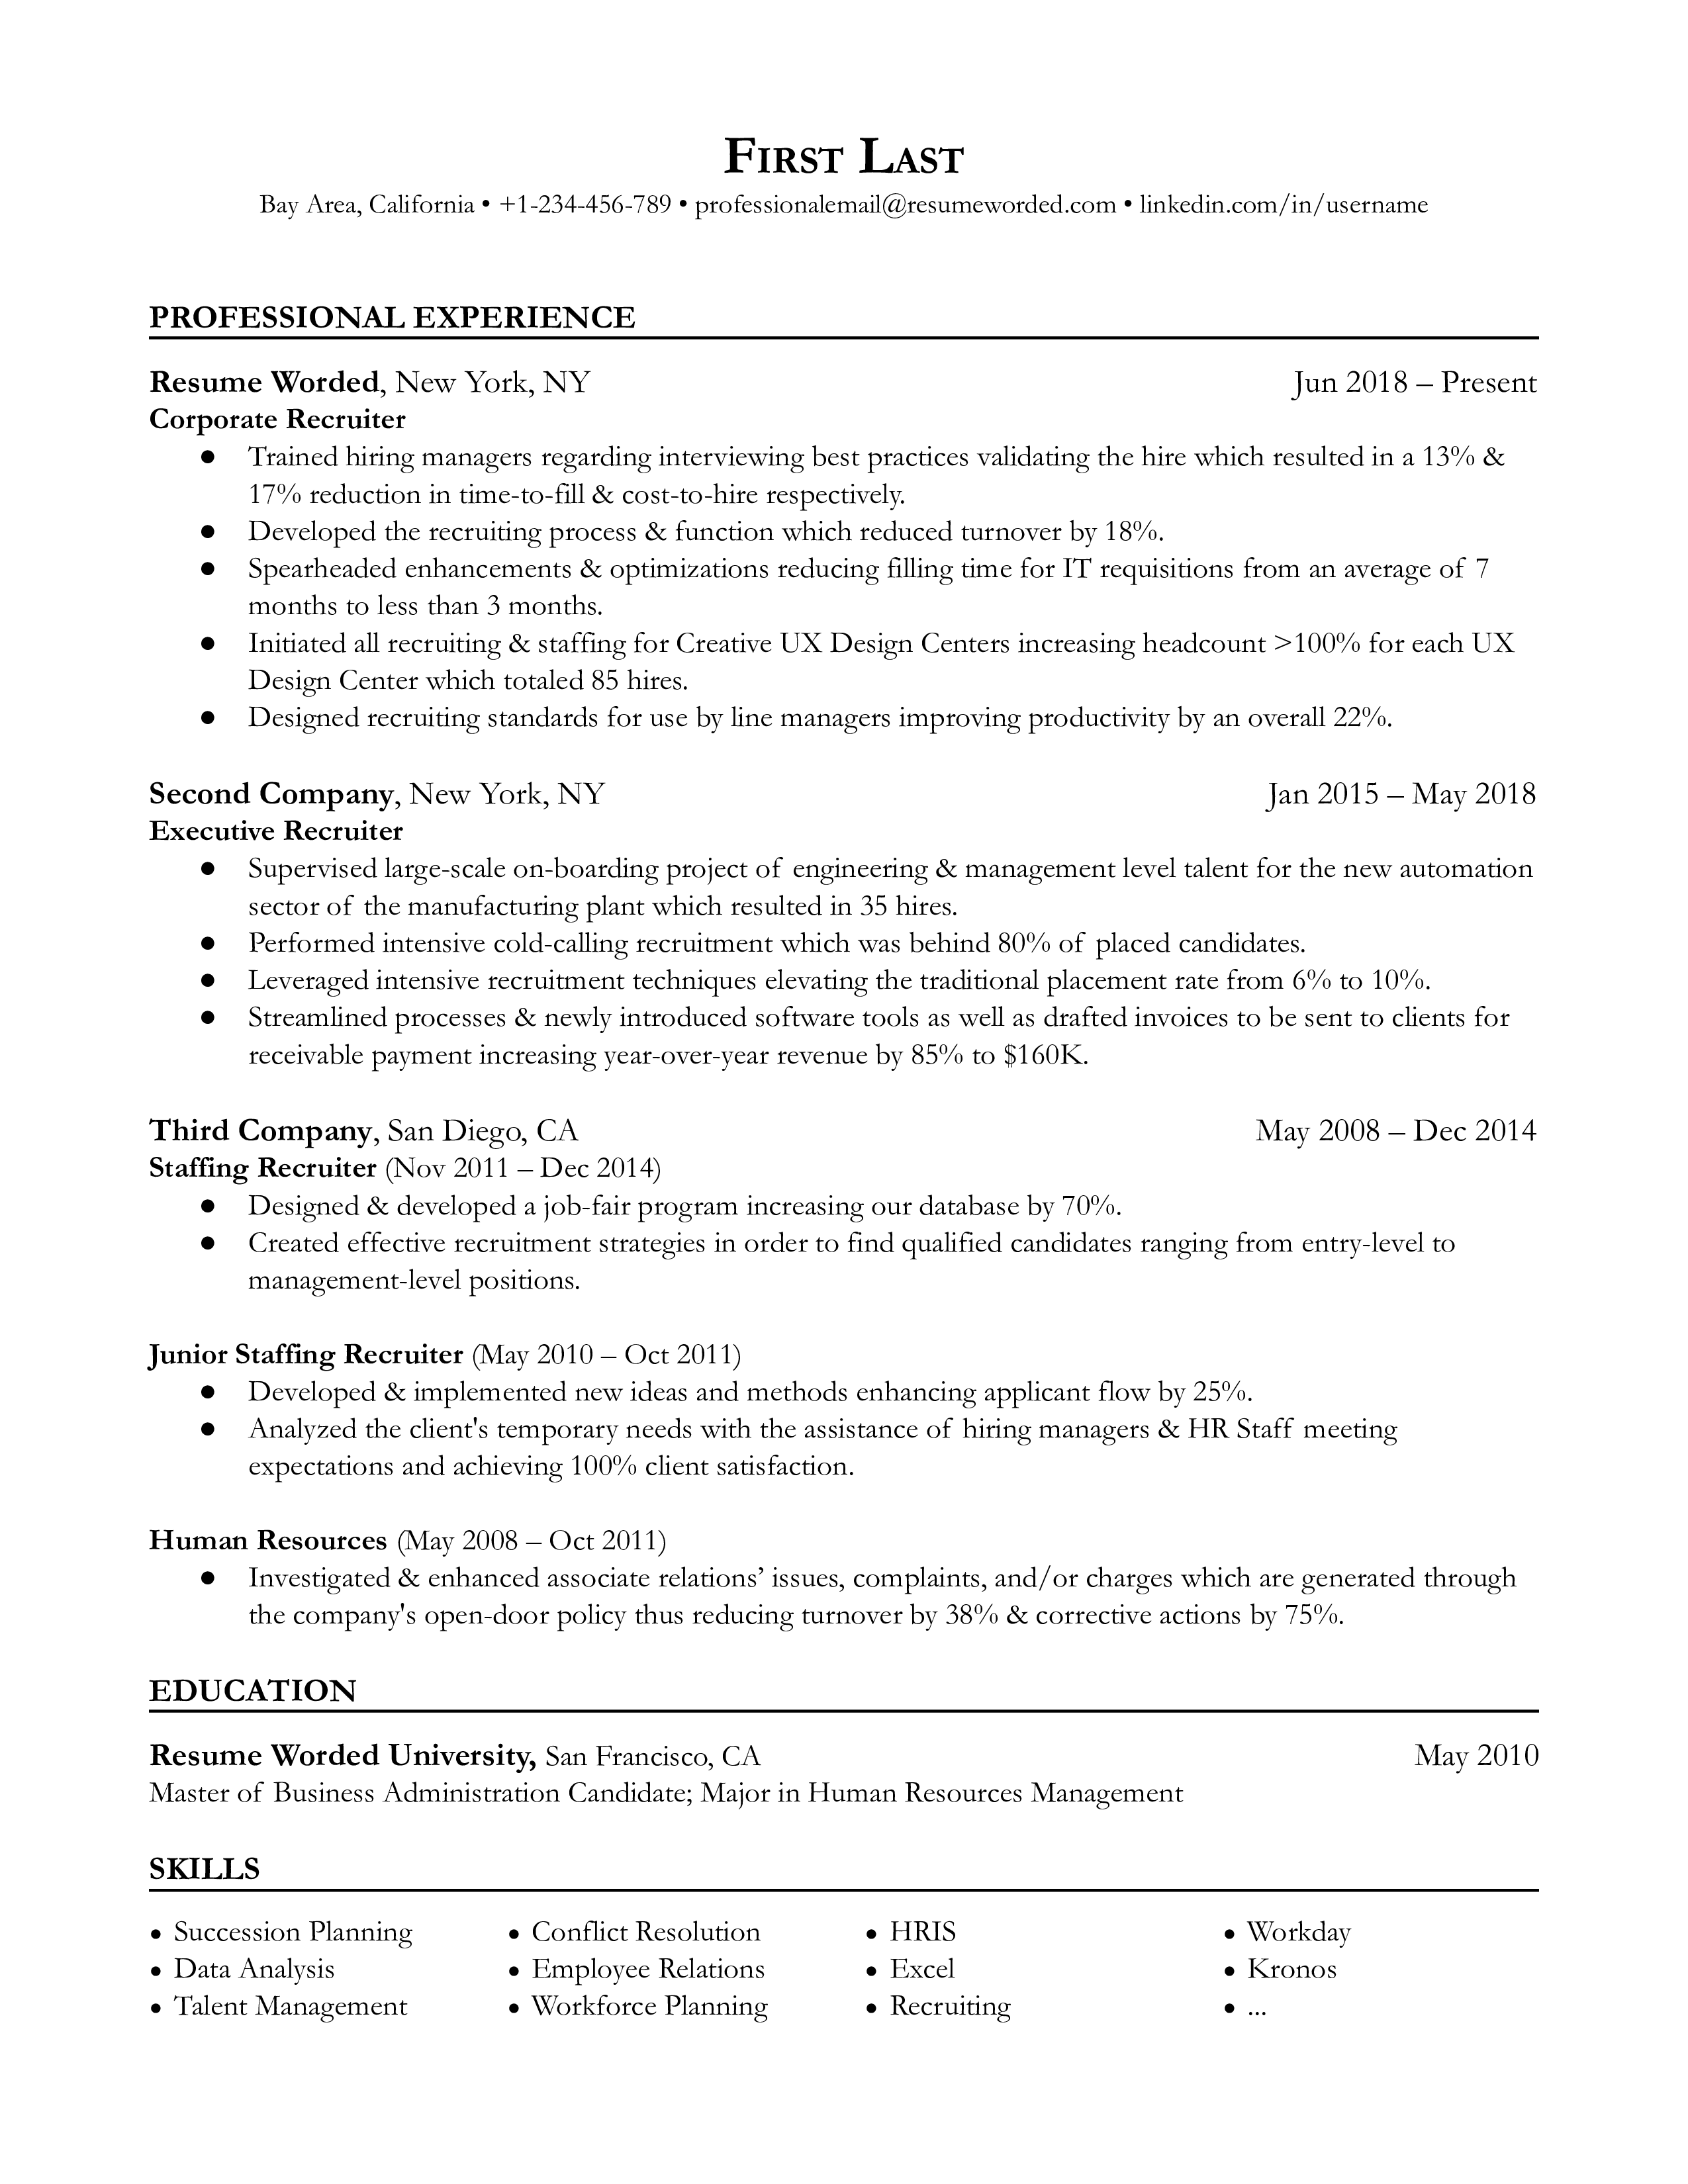 An example CV for a corporate recruiter highlighting recruitment strategies and diversity initiatives.